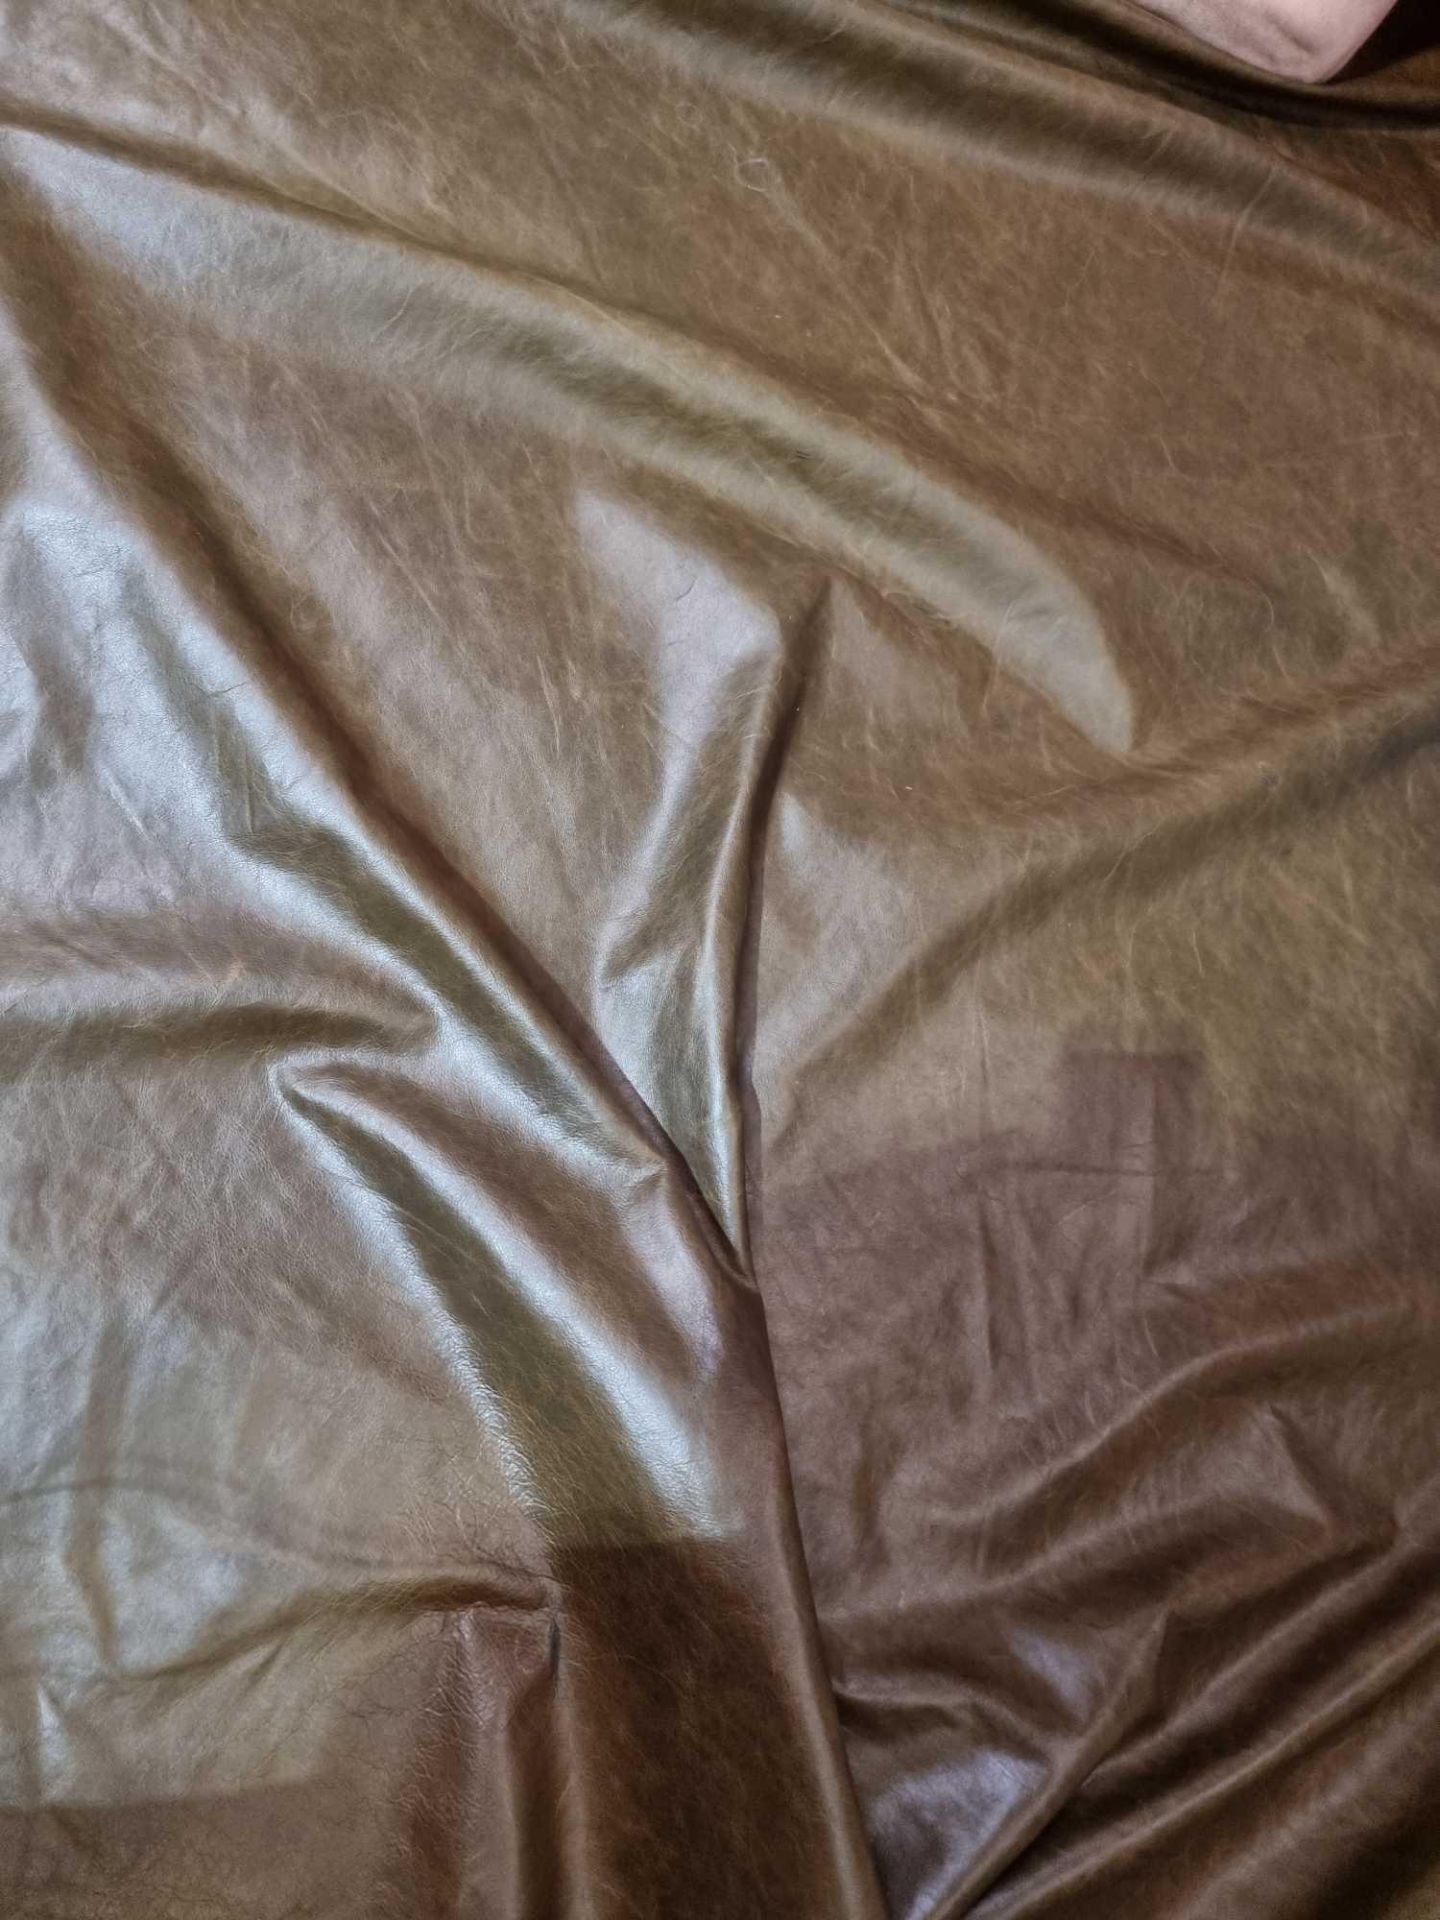 Yarwood Mustang Moss Leather Hide approximately 4.62mÂ² 2.2 x 2.1cm - Image 3 of 3